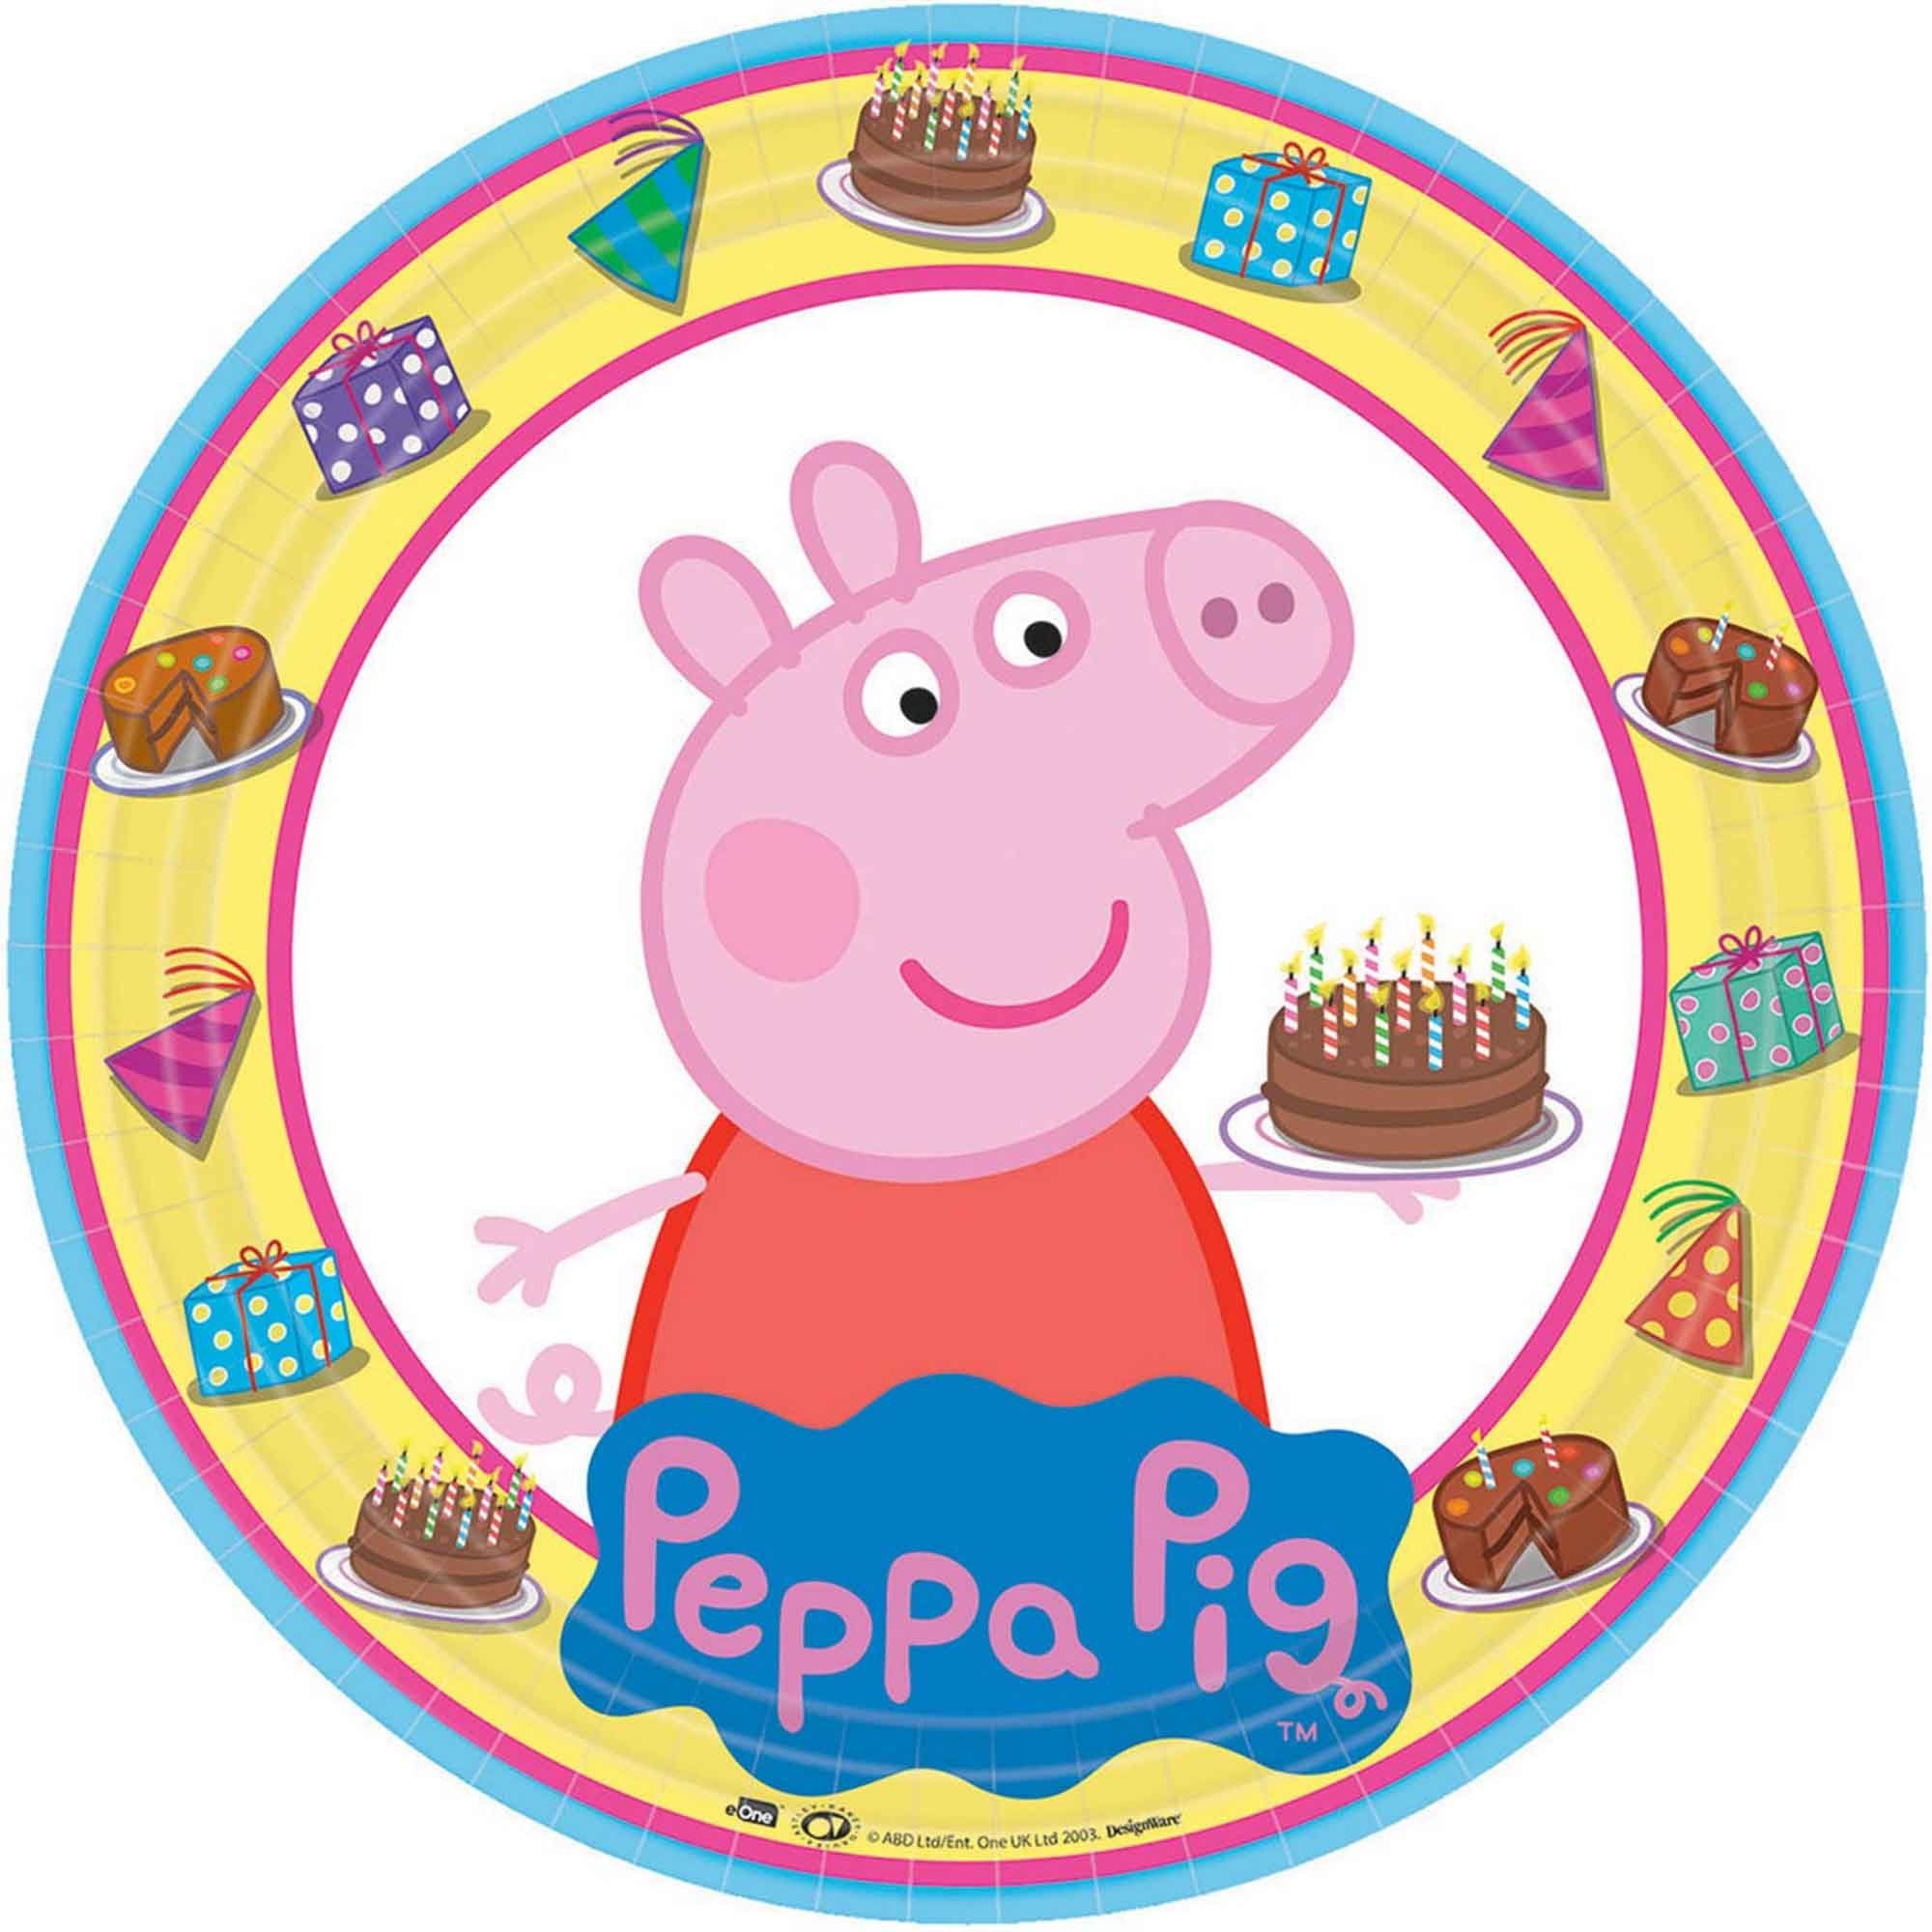 Peppa Pig party decorations- paper party plates 